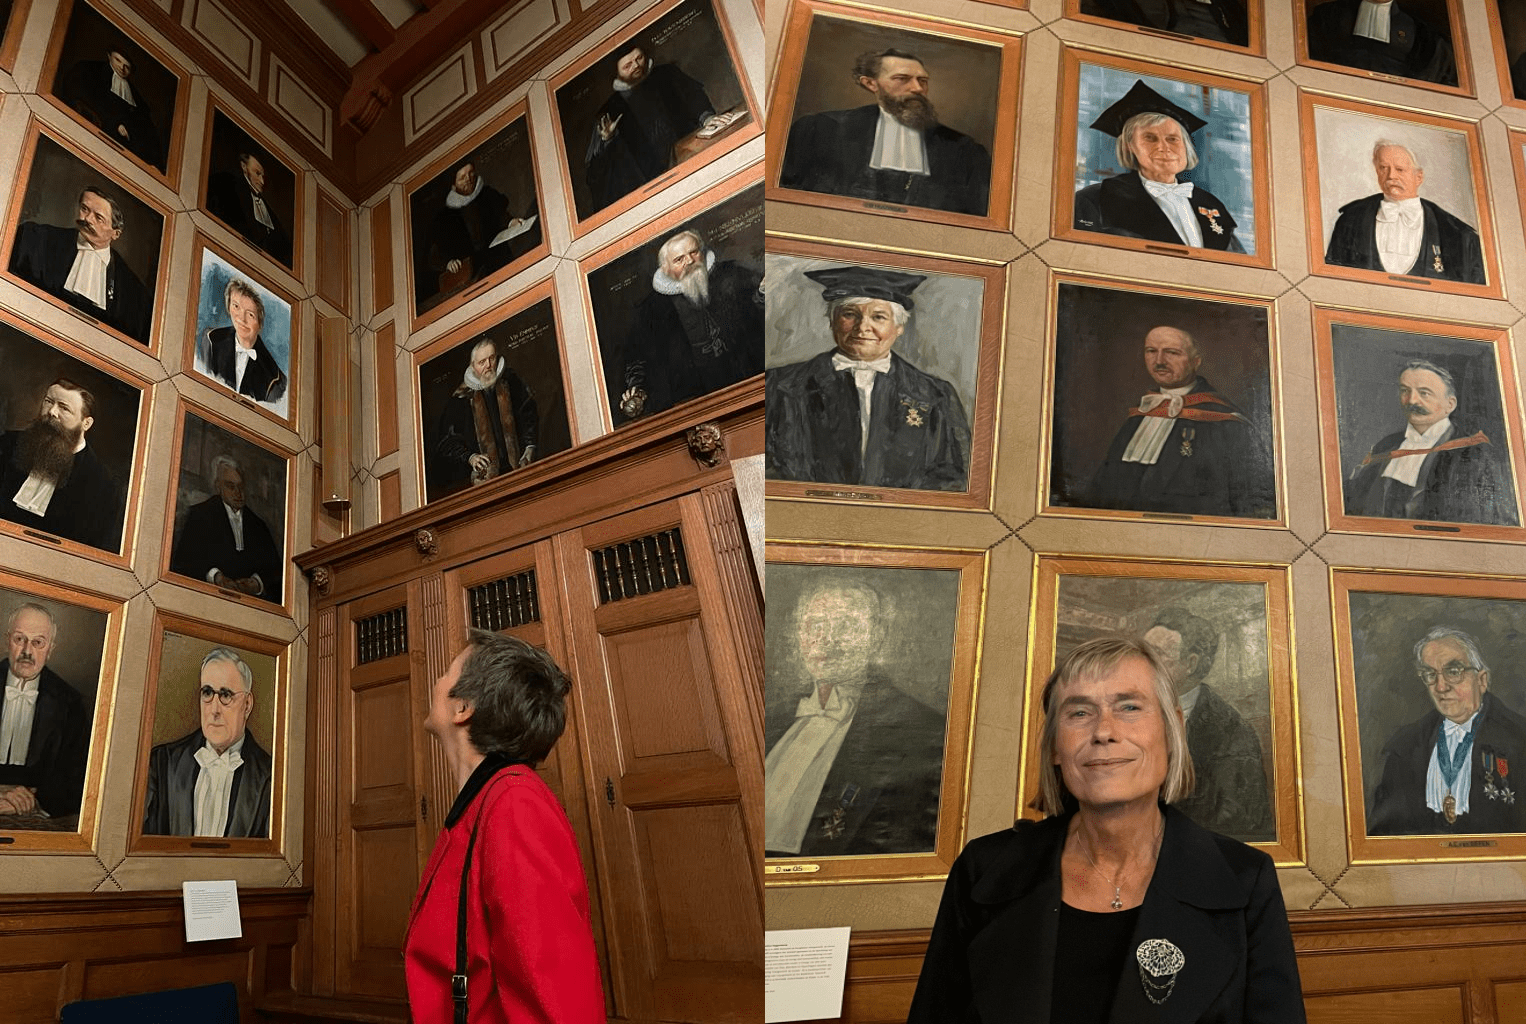 Prof. Clara Mulder (l) and Prof. Gerry Wakker and their portraits in the Senate Room